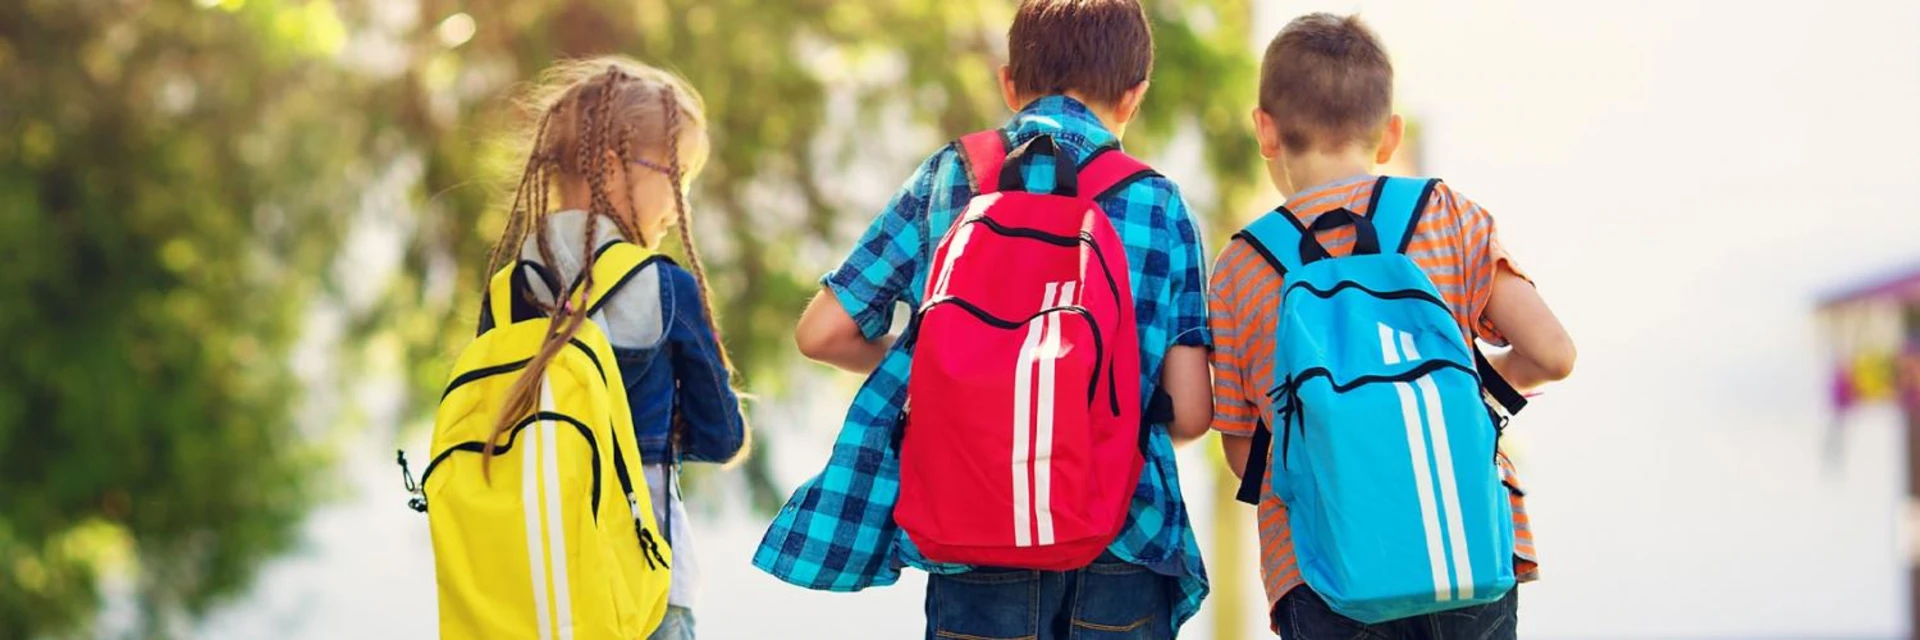 GO BACK TO SCHOOL WITH THESE DEALS FROM AAA TRUSTED PARTNERS